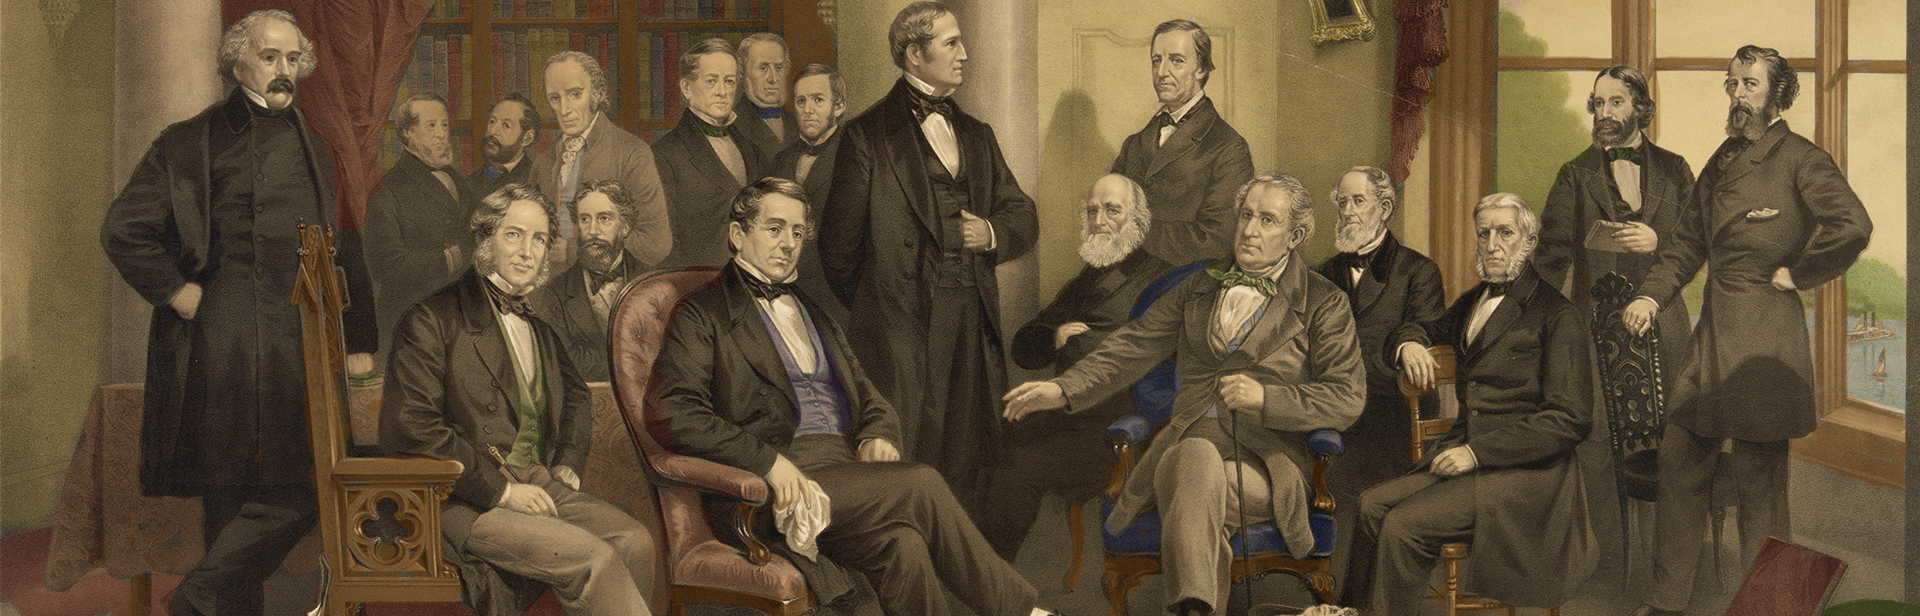 detail of print: Our Great Authors; a Literary Party at the Home of Washington Irving